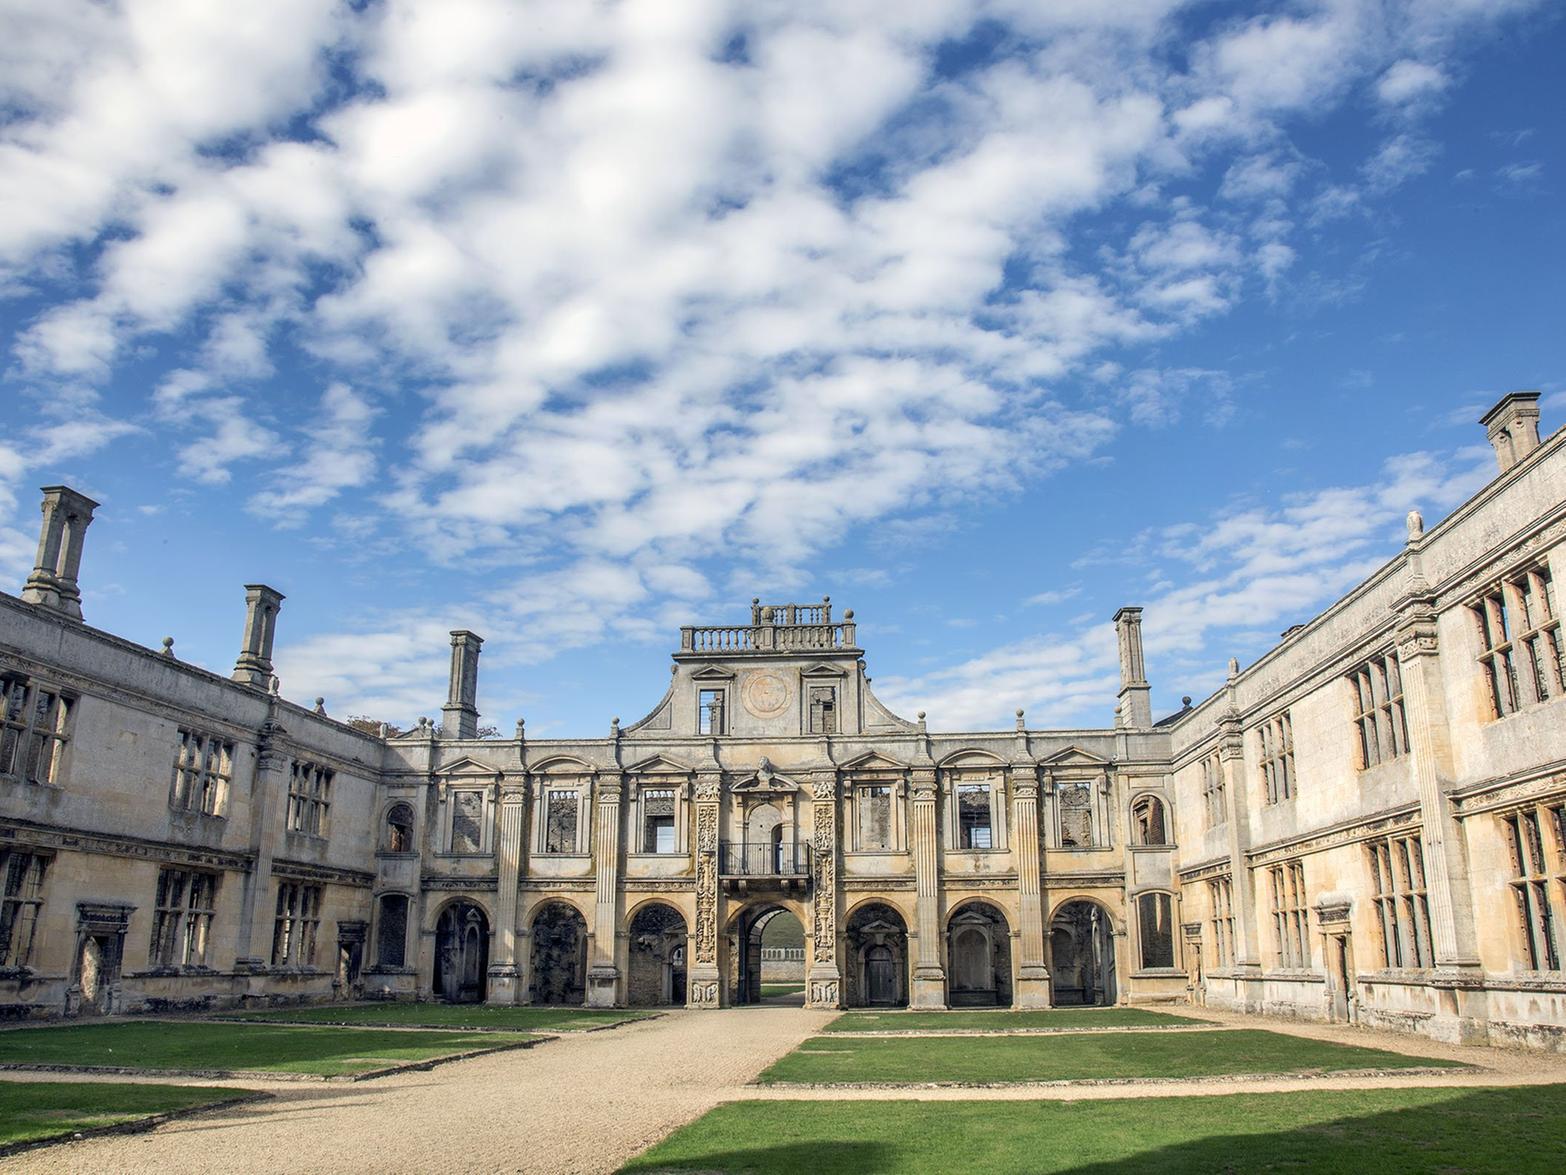 One of England's greatest Elizabethan houses, Kirby Hall near Gretton holds weddings with a great hall, billiard room and library.